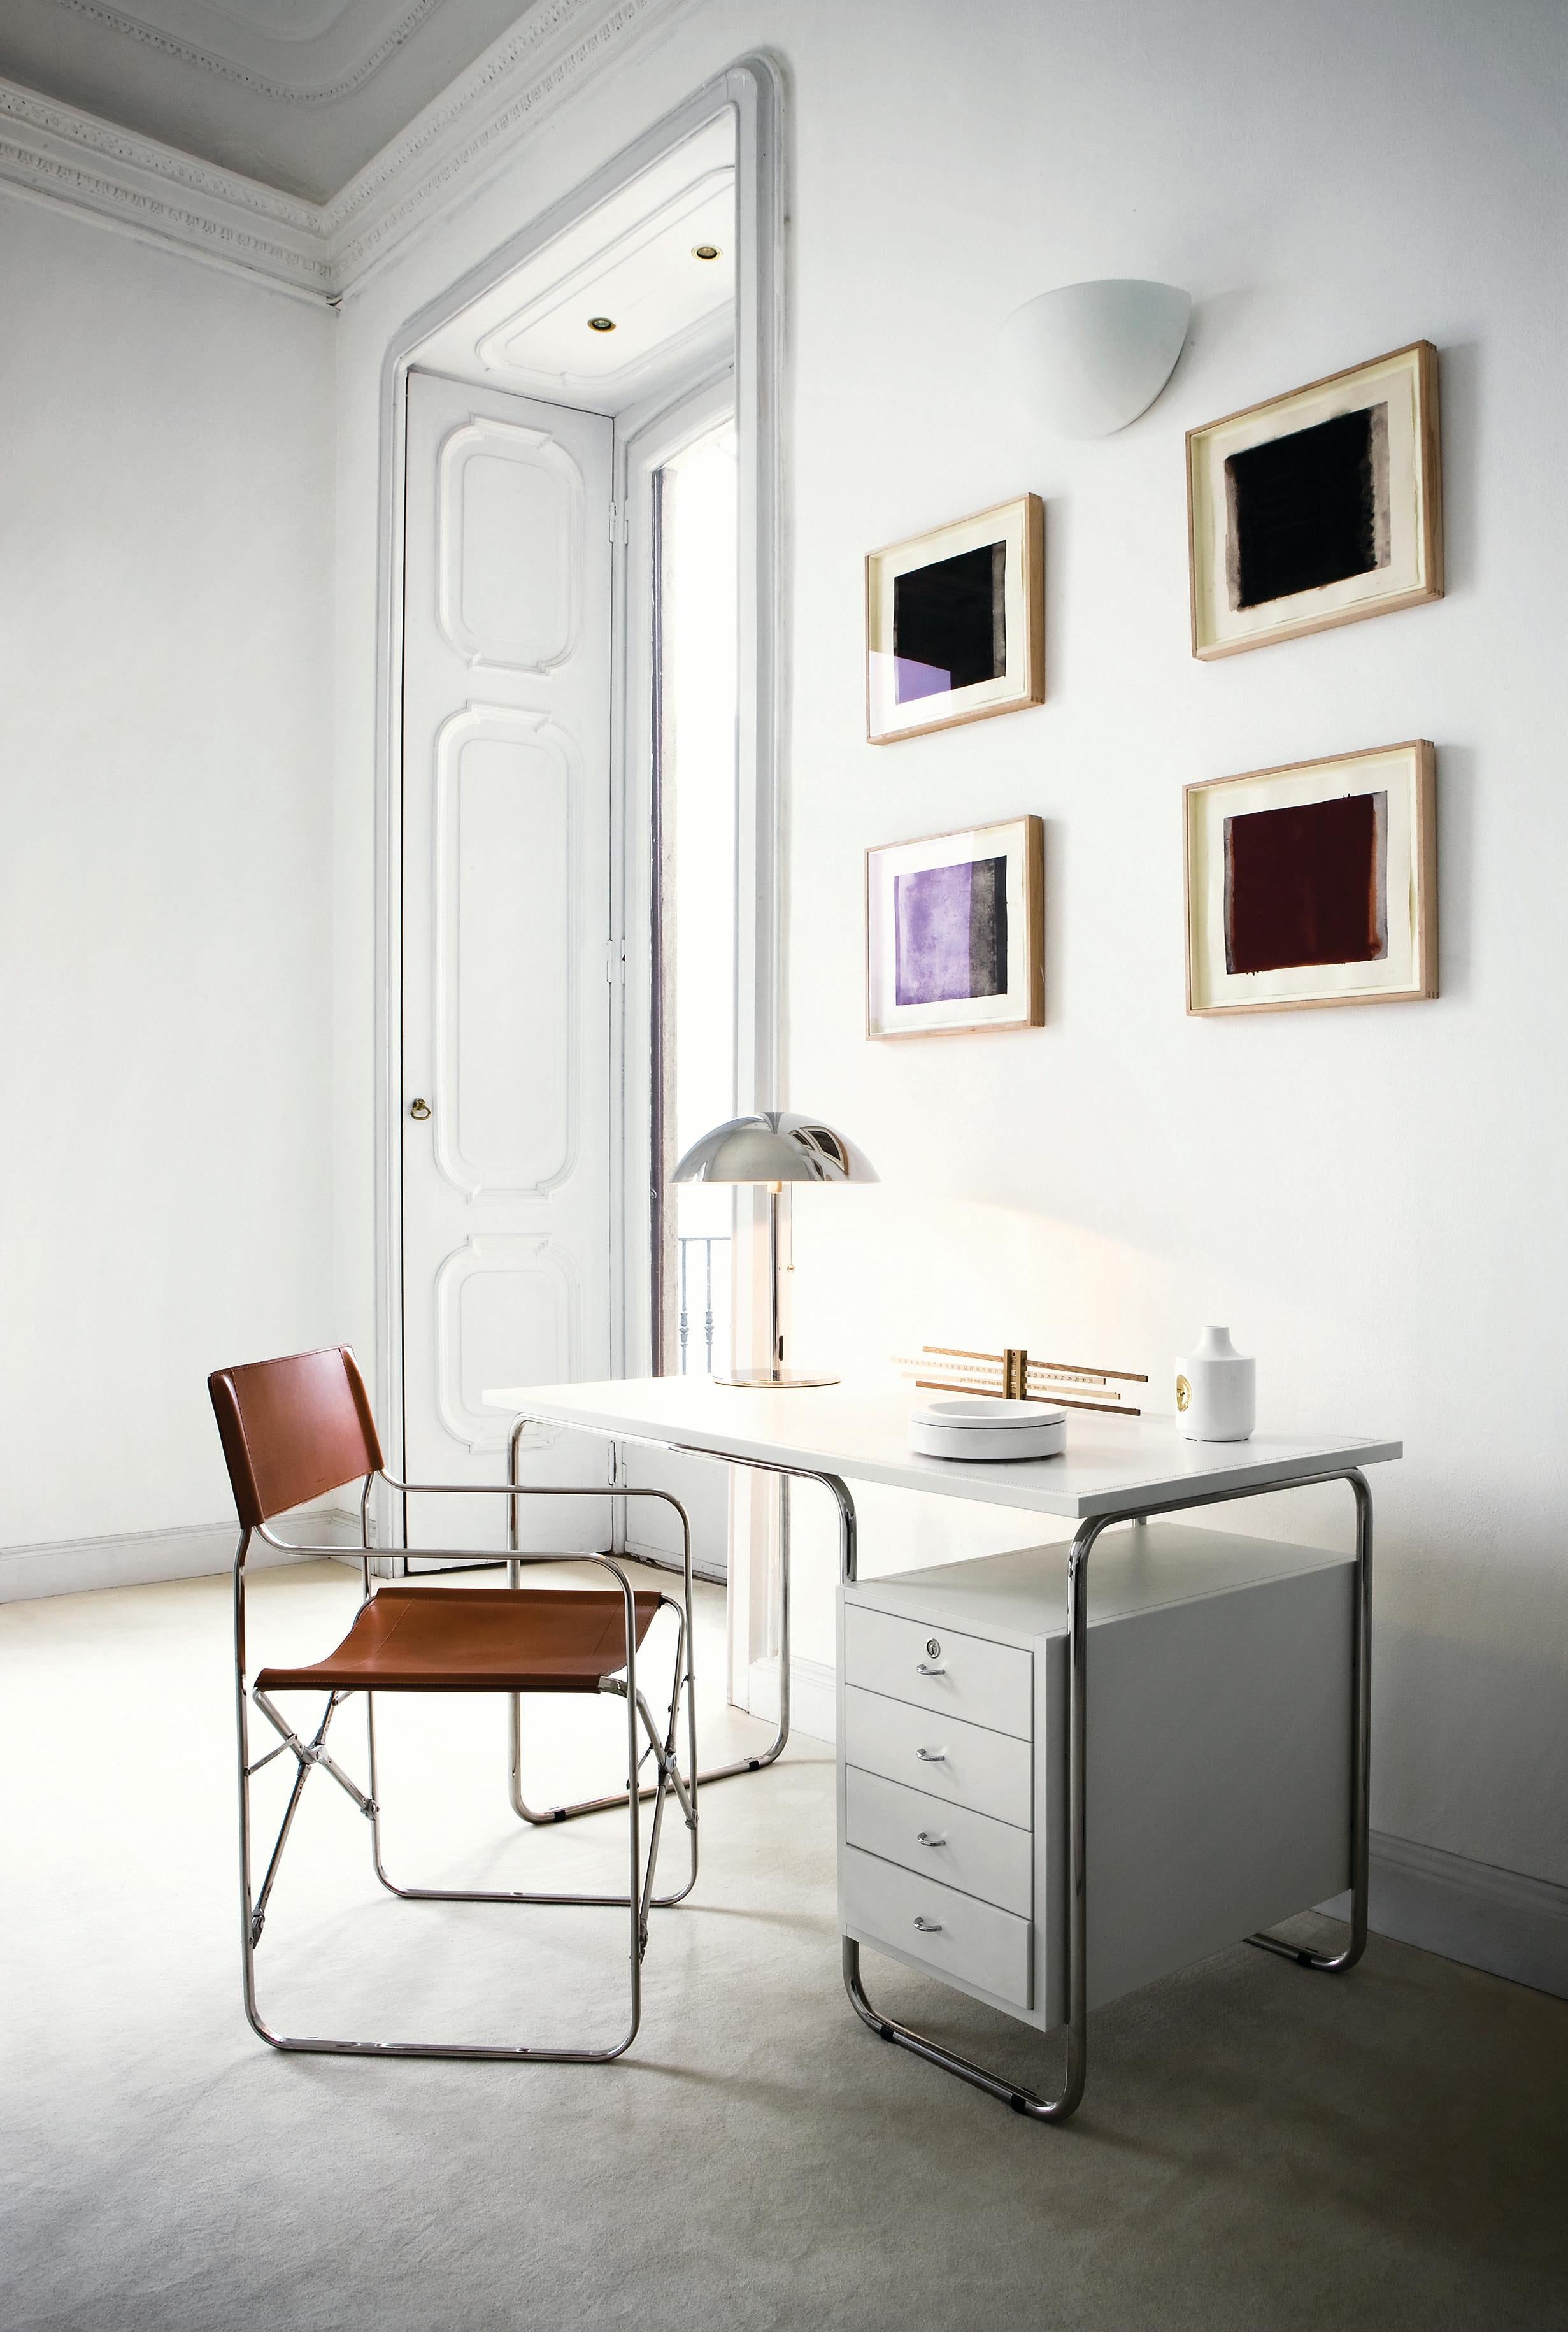 Zanotta Comacina Writing Desk in White Top & Stainless Steel Frame by Piero Bottoni

18/8 stainless steel tubular frame. Top and storage unit in medium density fiberboard finished with scratch resistant embossing in the colours black or white. The